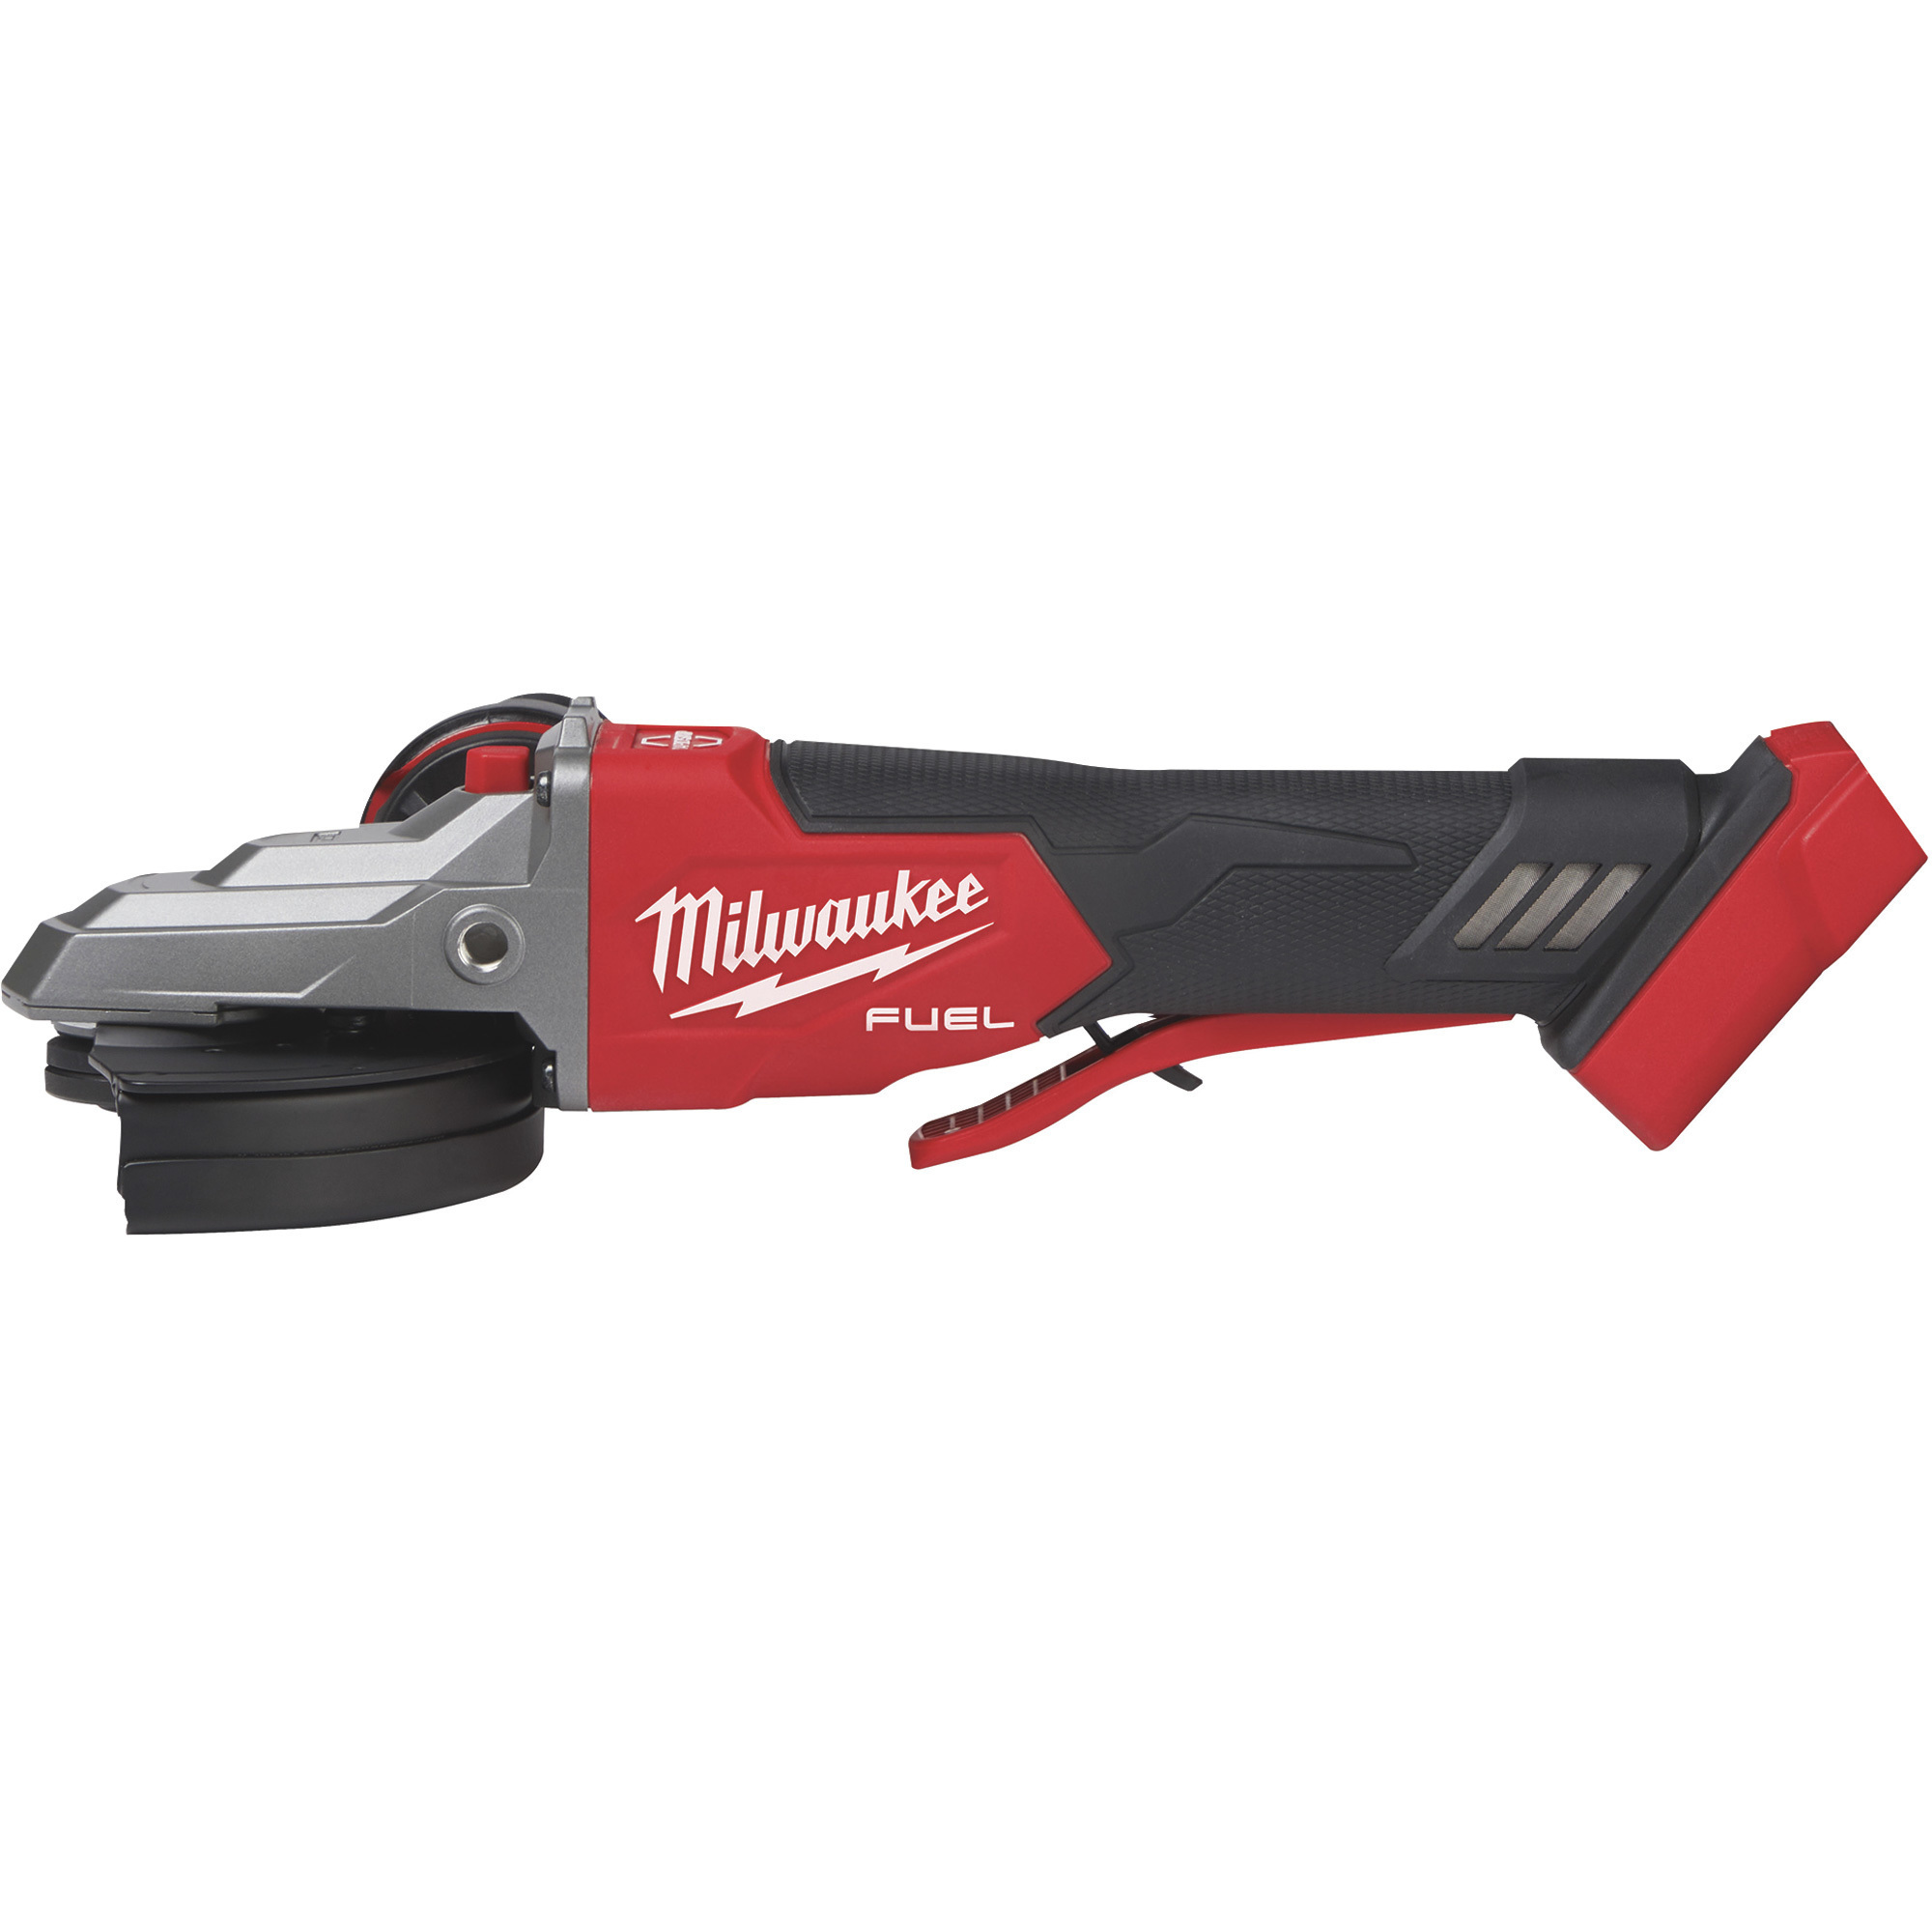 Milwaukee M18 FUEL 5Inch Flathead Braking Angle Grinder, Tool Only, Paddle Switch No-Lock, Model 2886-20